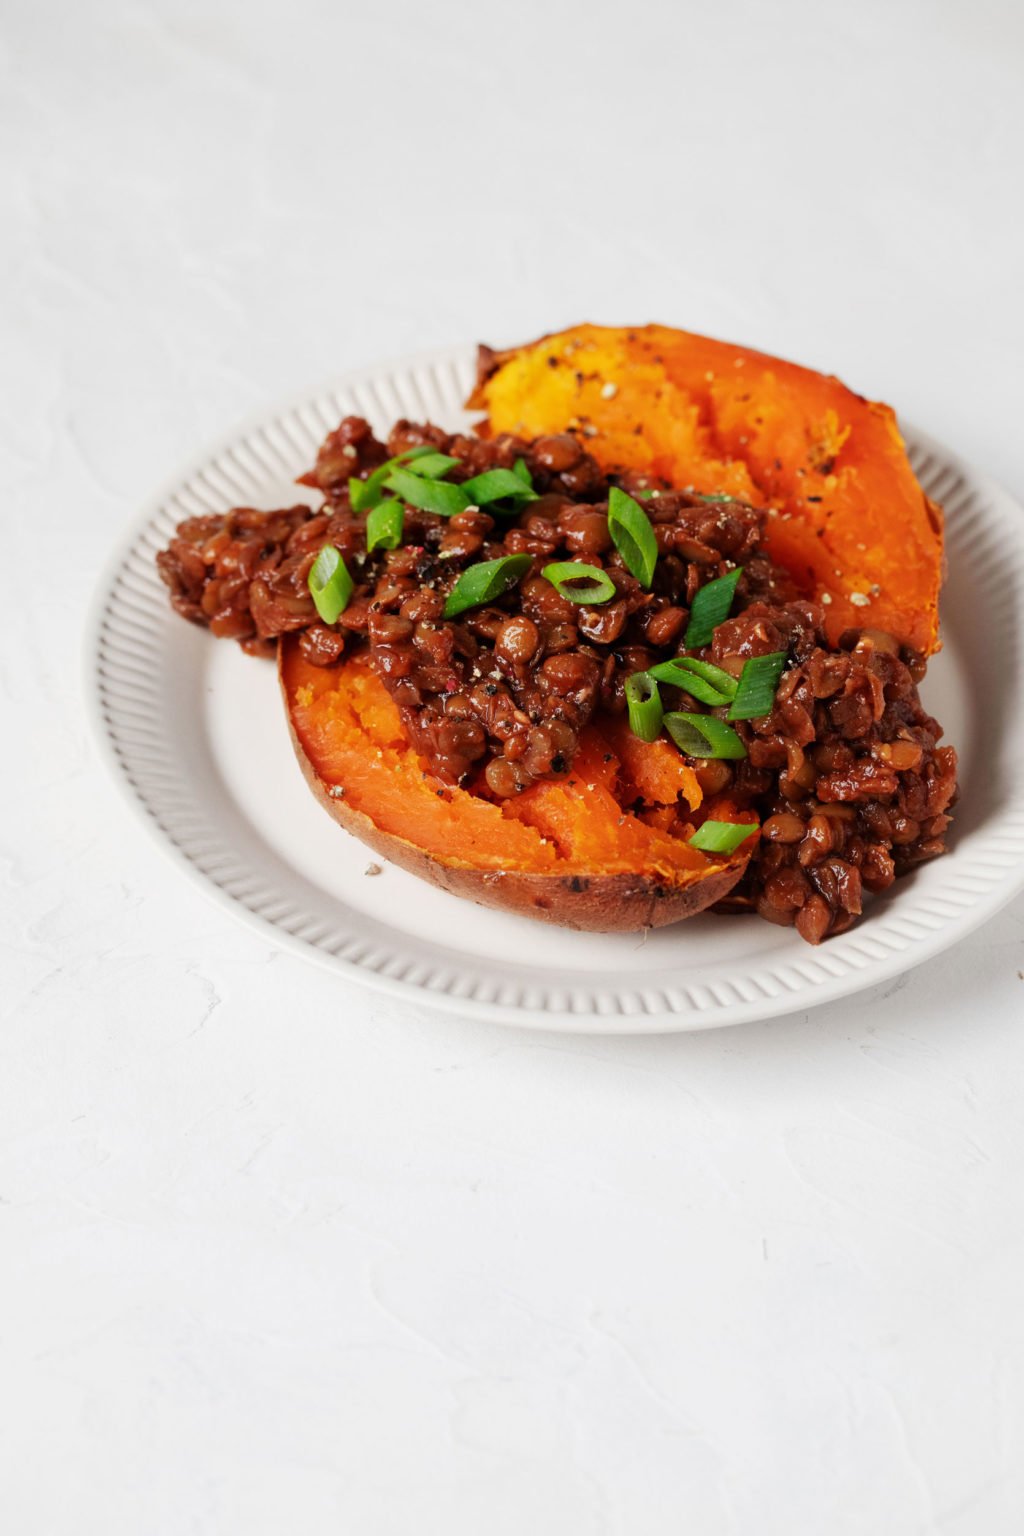 A baked yam has been split open and topped with a vegan protein, along with a sprinkle of chopped green onion tops.